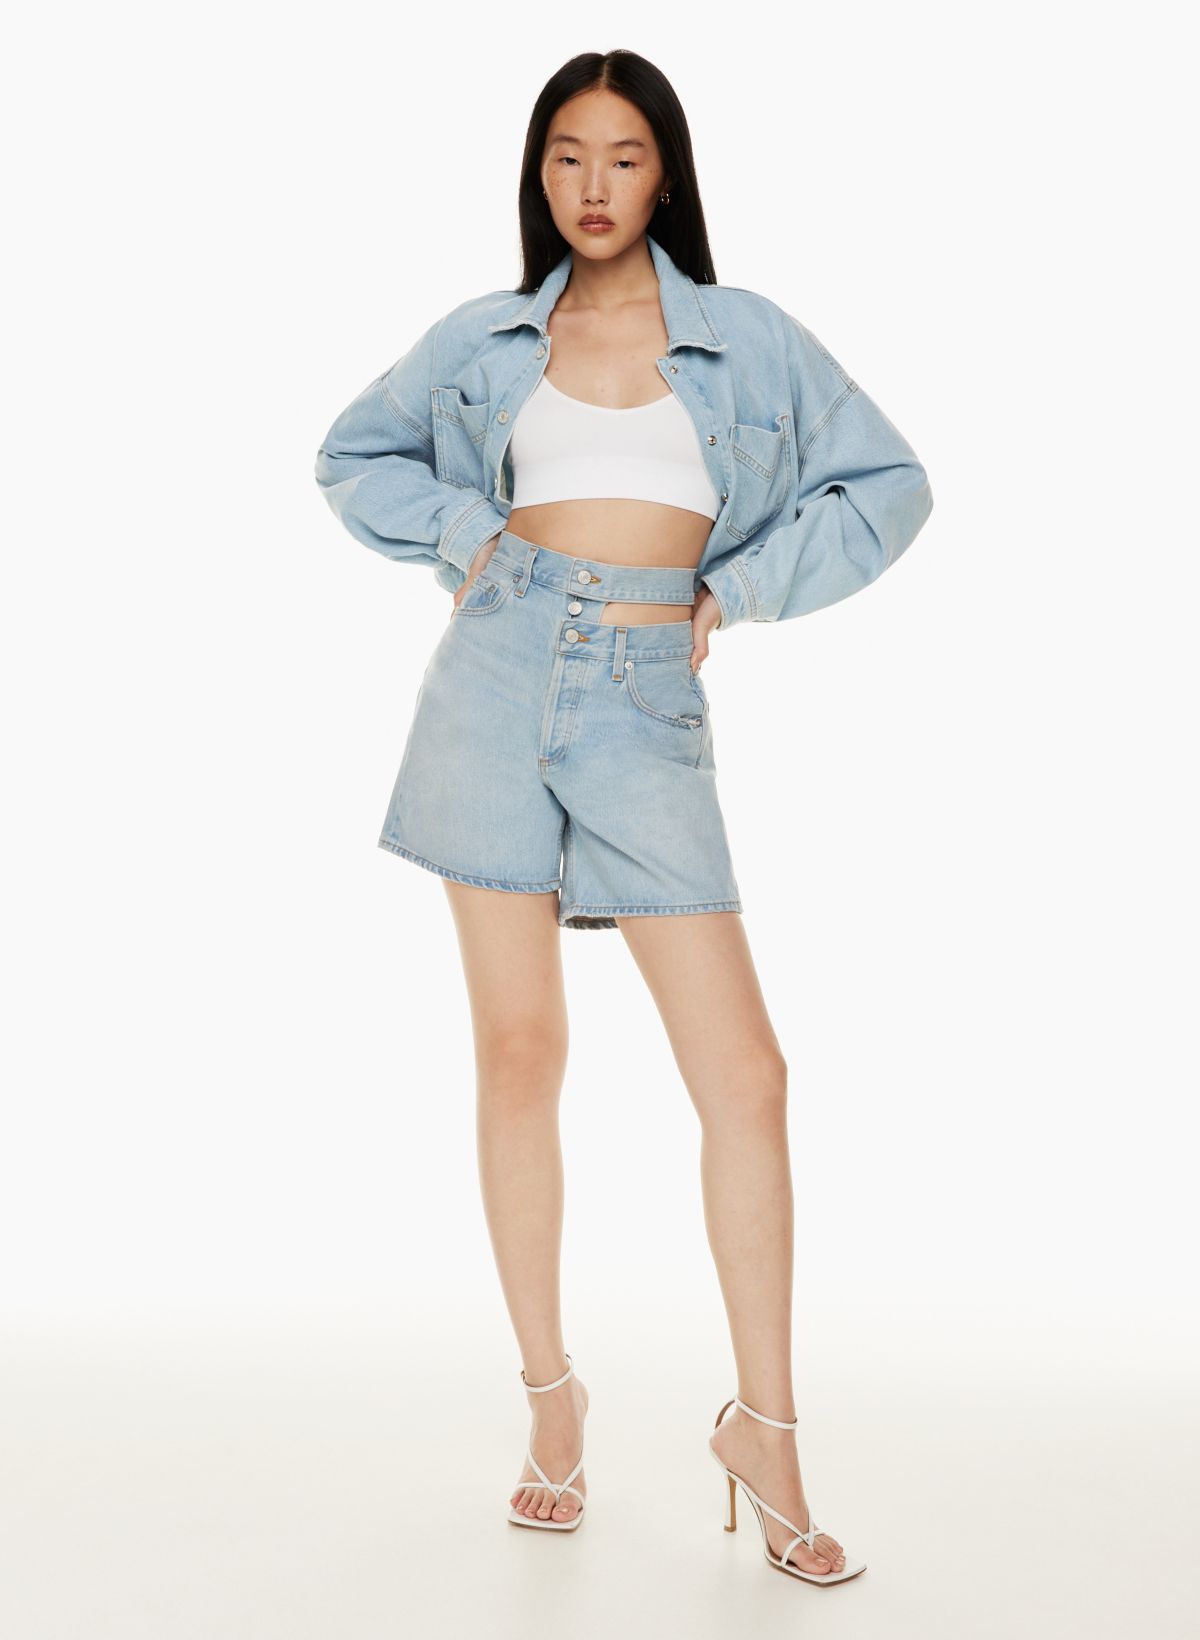 Sexy Aritzia Denim Shorts With Pockets For Women Perfect For